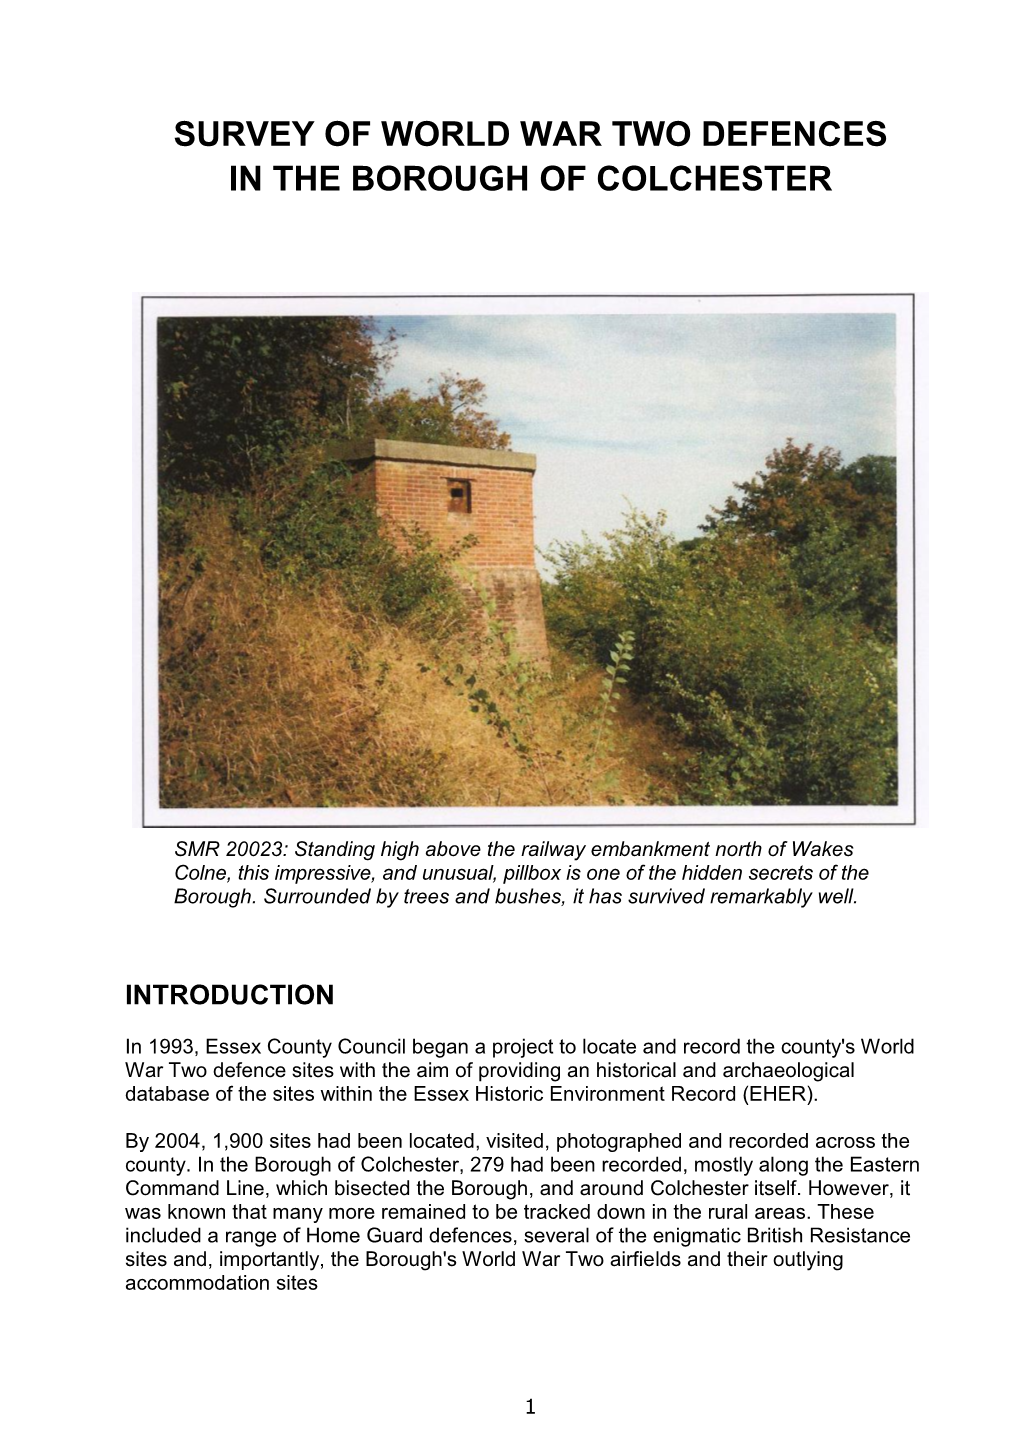 Survey of World War Two Defences in the Borough of Colchester